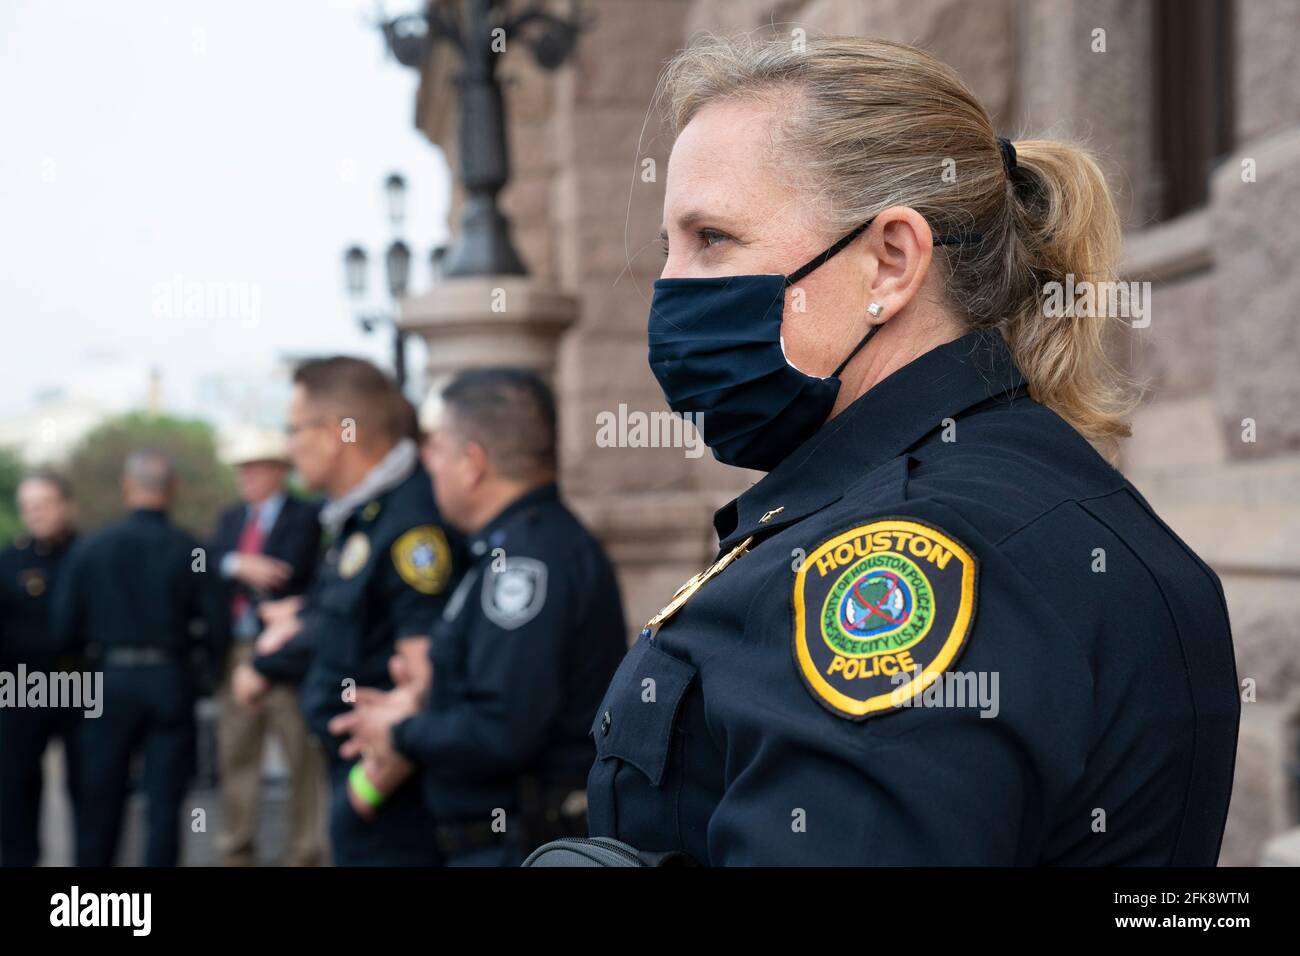 Austin, TX USA May 29, 2021: Jessica Anderson of the Houston Police Dept. listens as Texas police chiefs and commanders talk on the south steps of the Texas Capitol. The group opposes bills in the Senate that would allow anyone over 21 to publicly carry a handgun with no licensing or training requirement. Police leaders argue it will make their jobs harder as gun crimes are spiking statewide. Credit: Bob Daemmrich/Alamy Live News Stock Photo